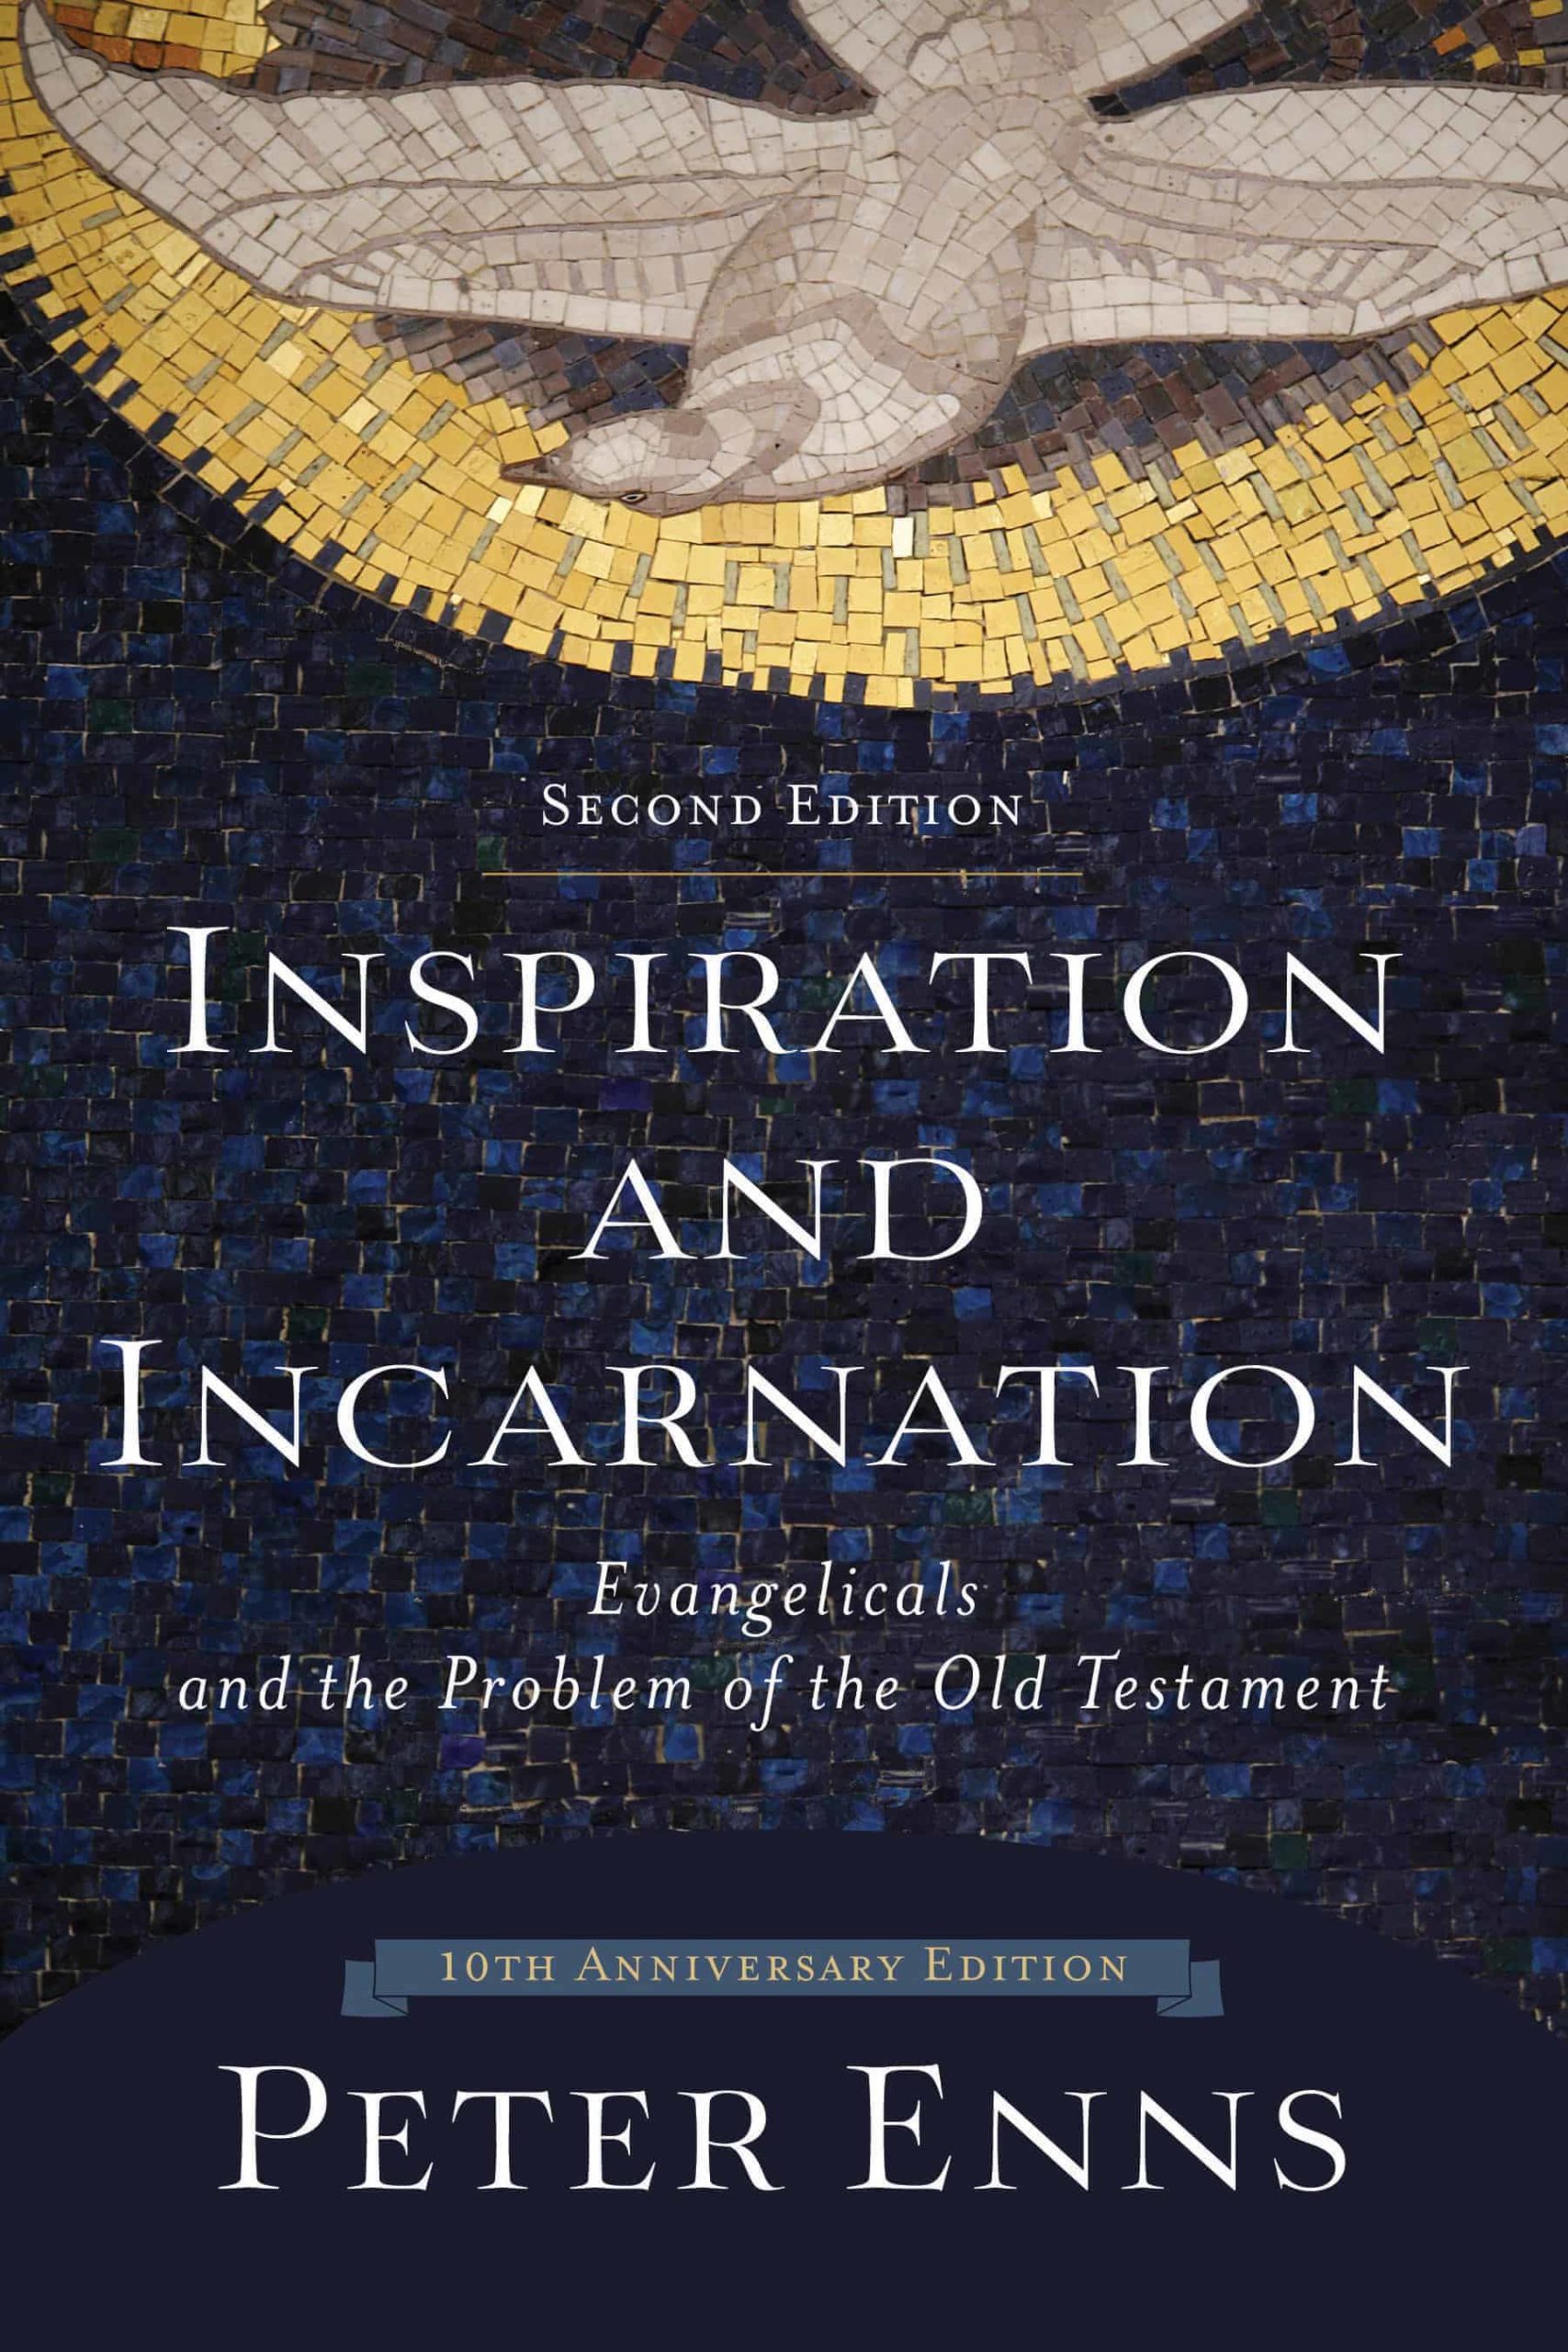 “The Bible is Diverse Because Life Is”: Rachel Held Evans Continues her Review of “Inspiration and Incarnation”